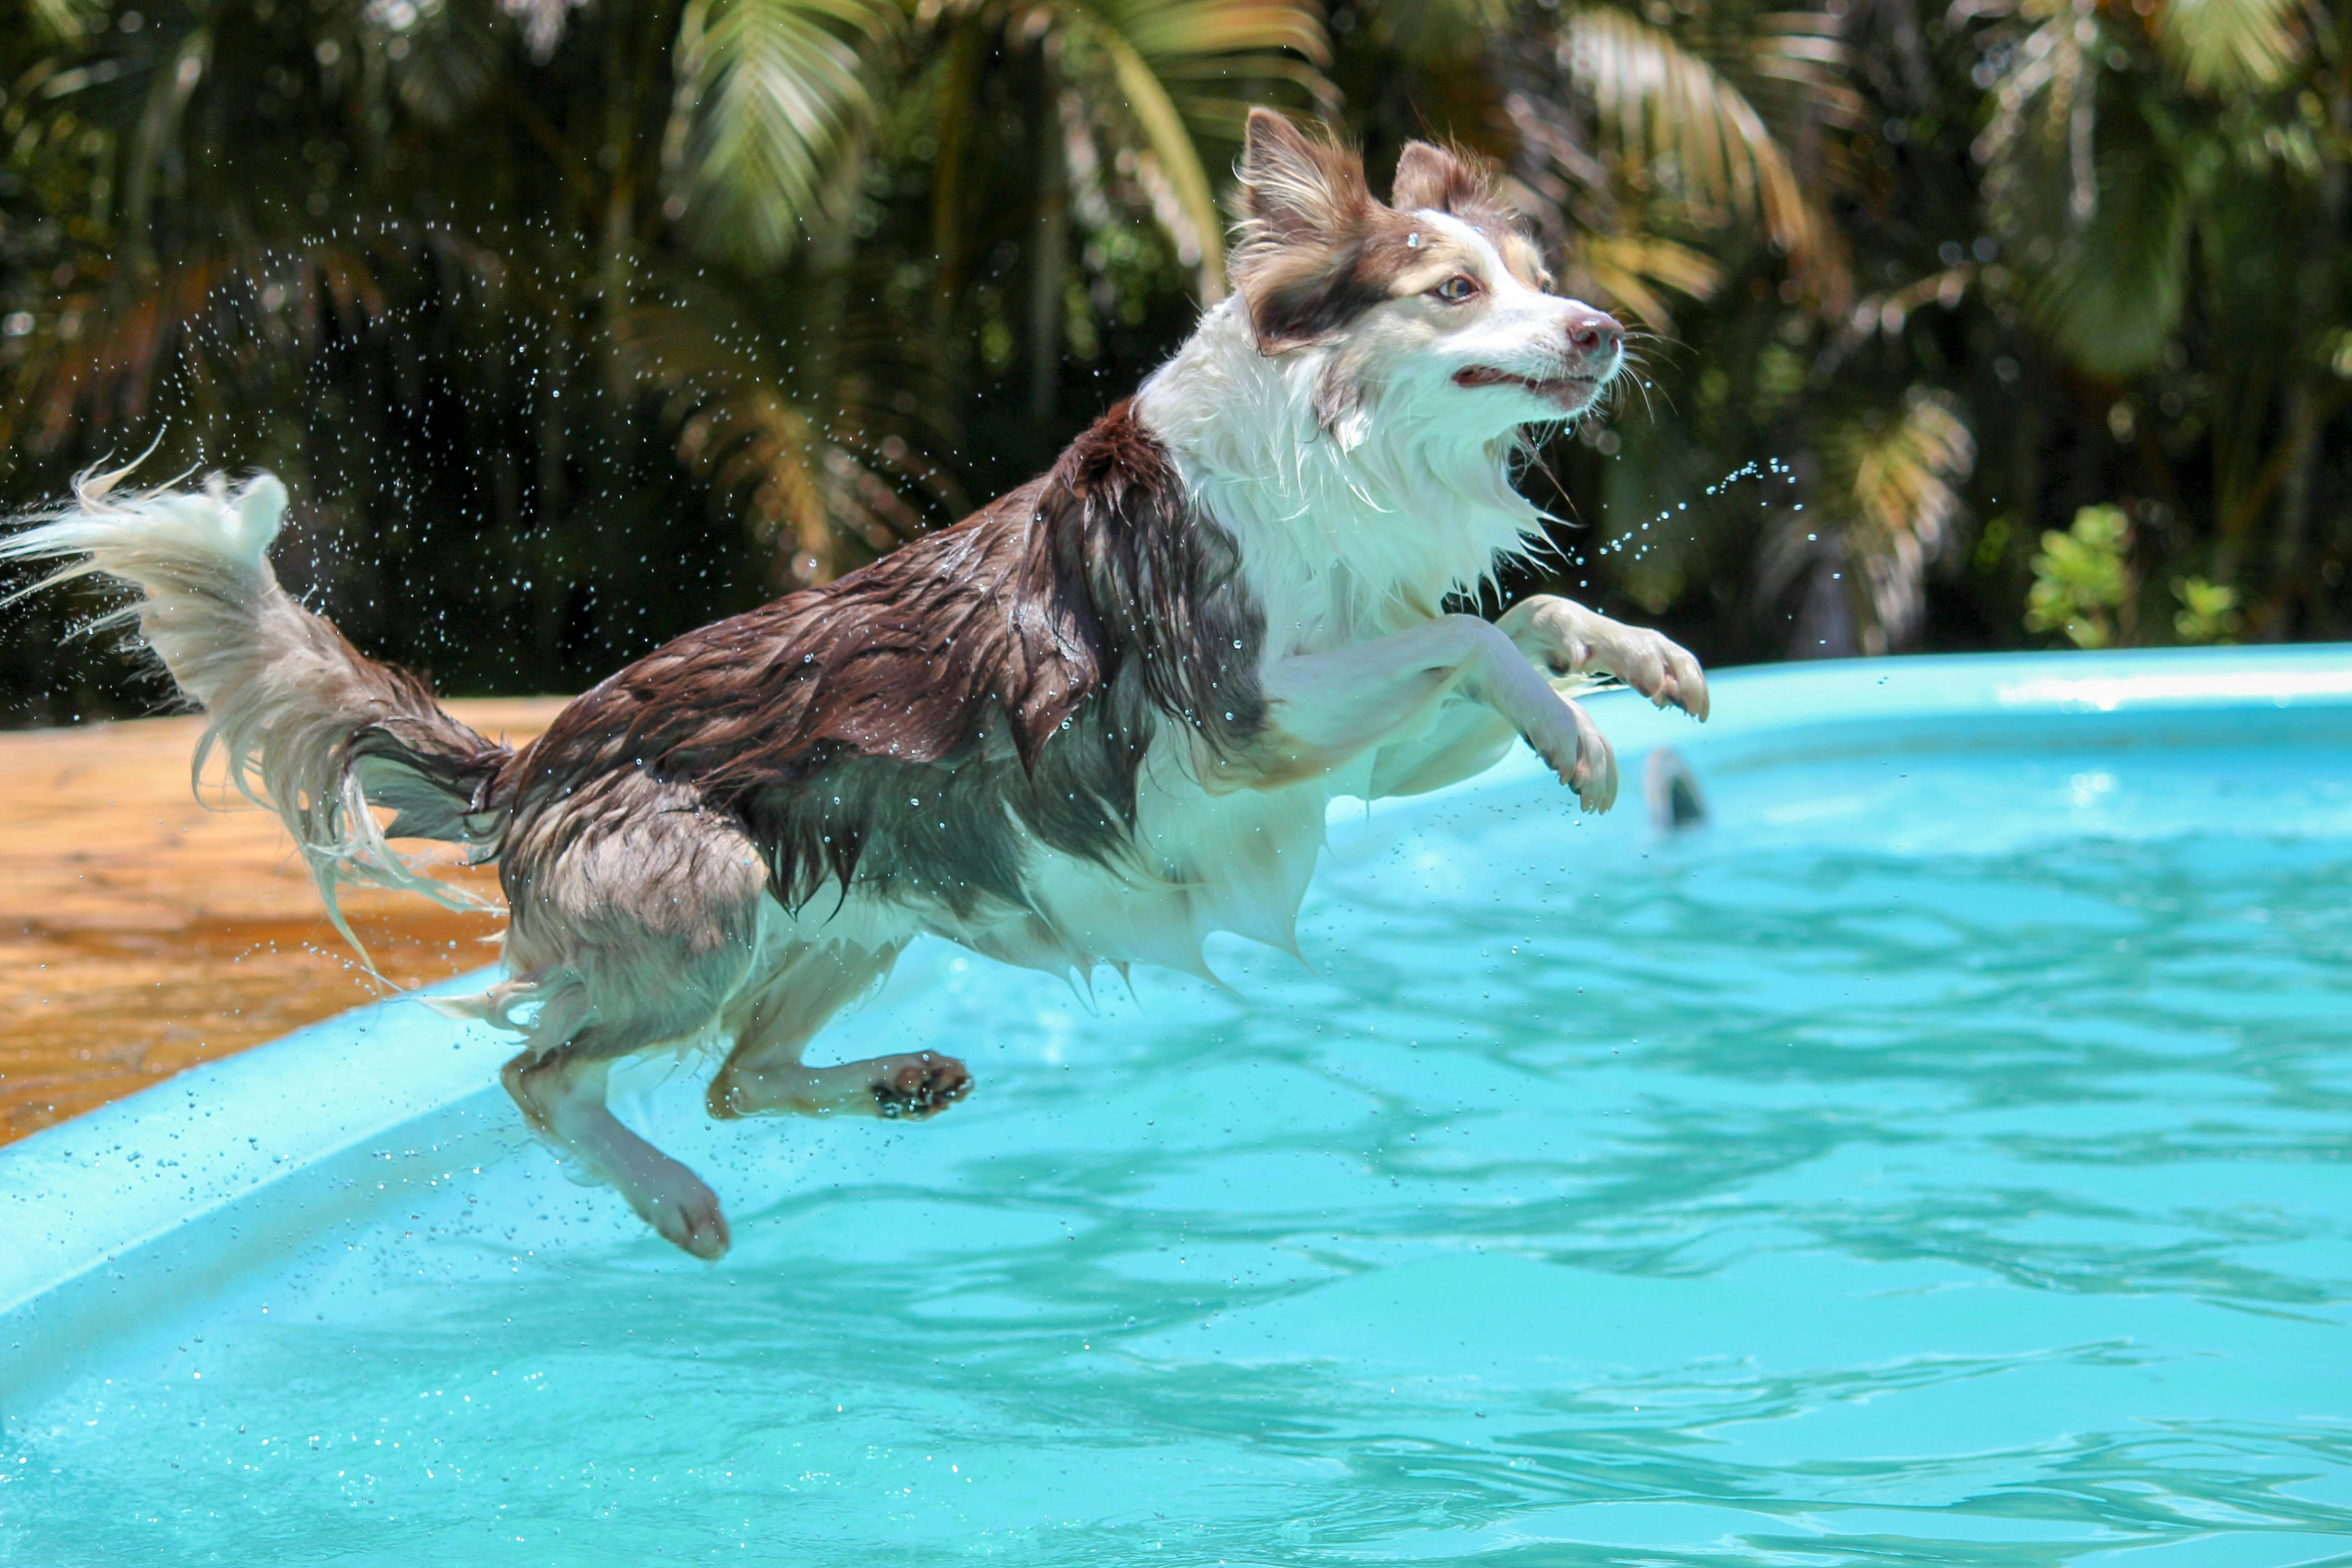 Dog jumping into the pool